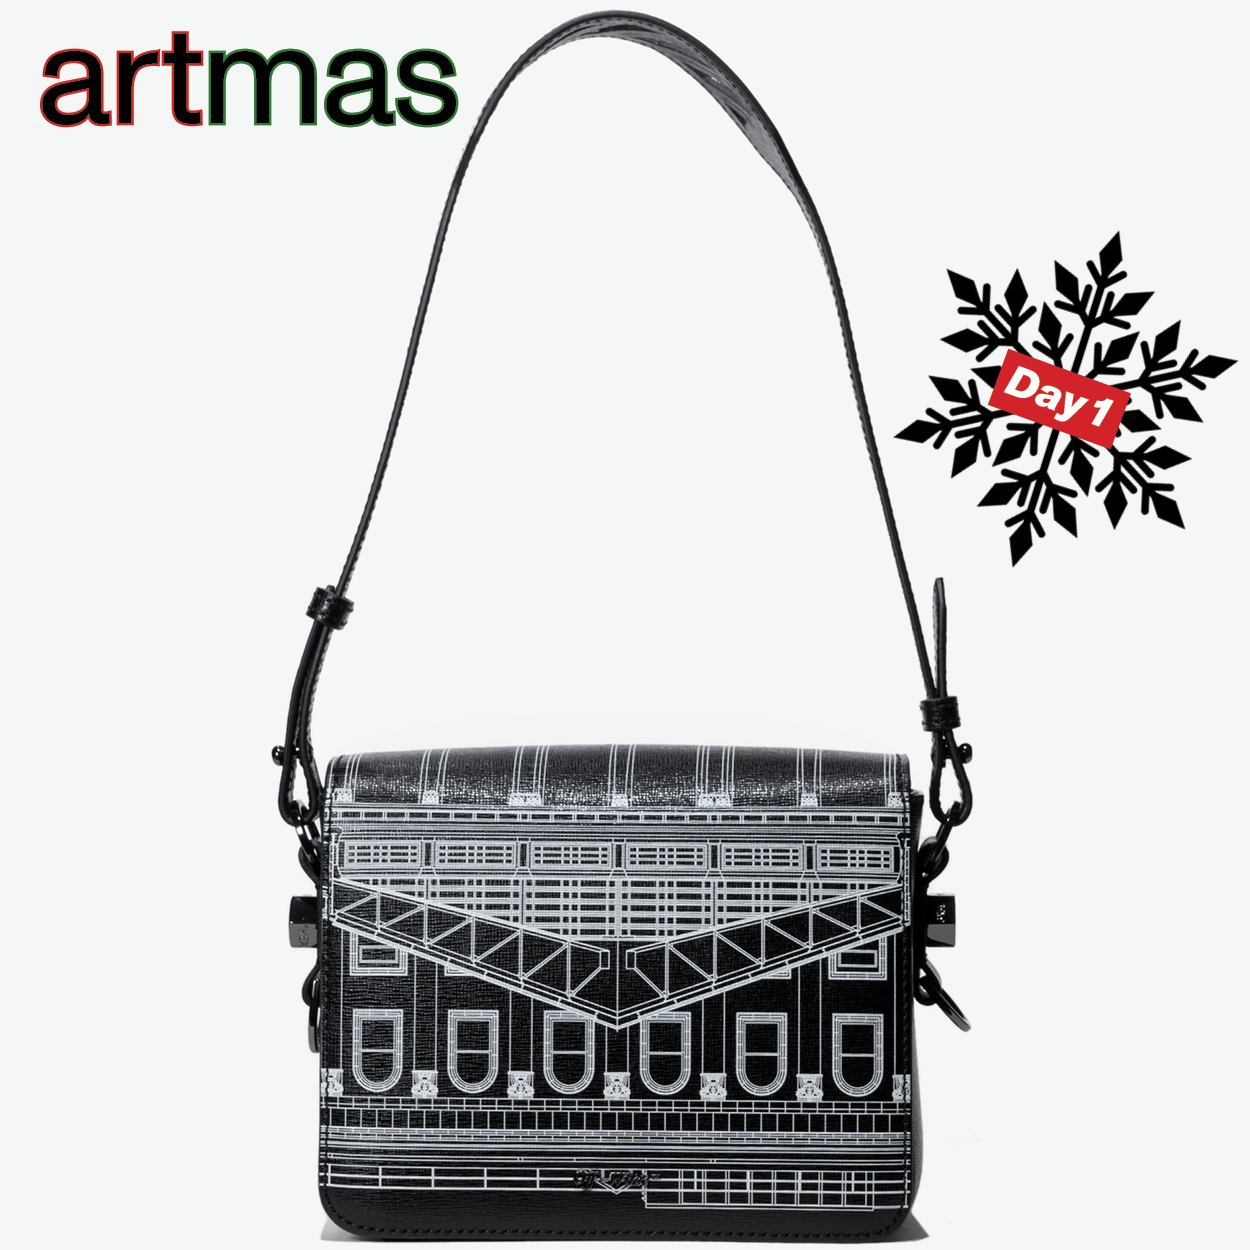 On the First Day of Artmas, My True Love Gave to Me… a Handbag From a Giant  of Contemporary Art and Design History